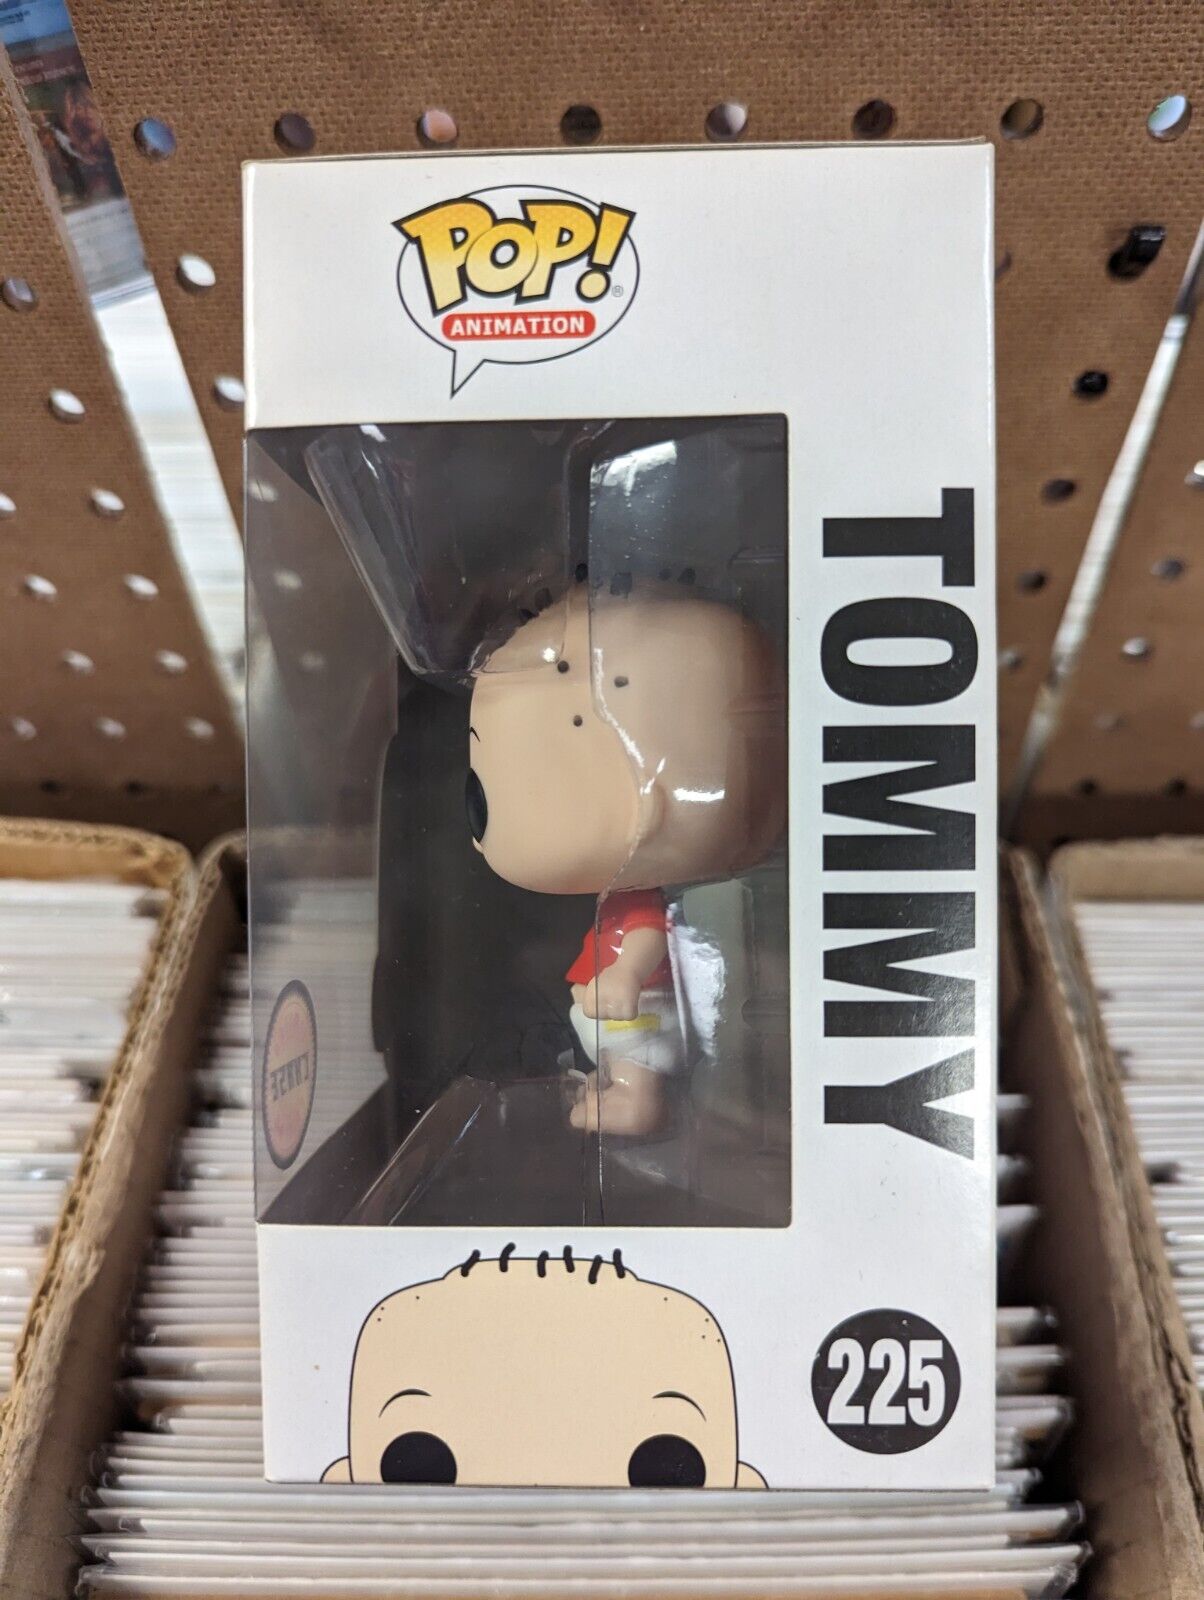 Funko Pop Tommy 225 Chase Rugrats